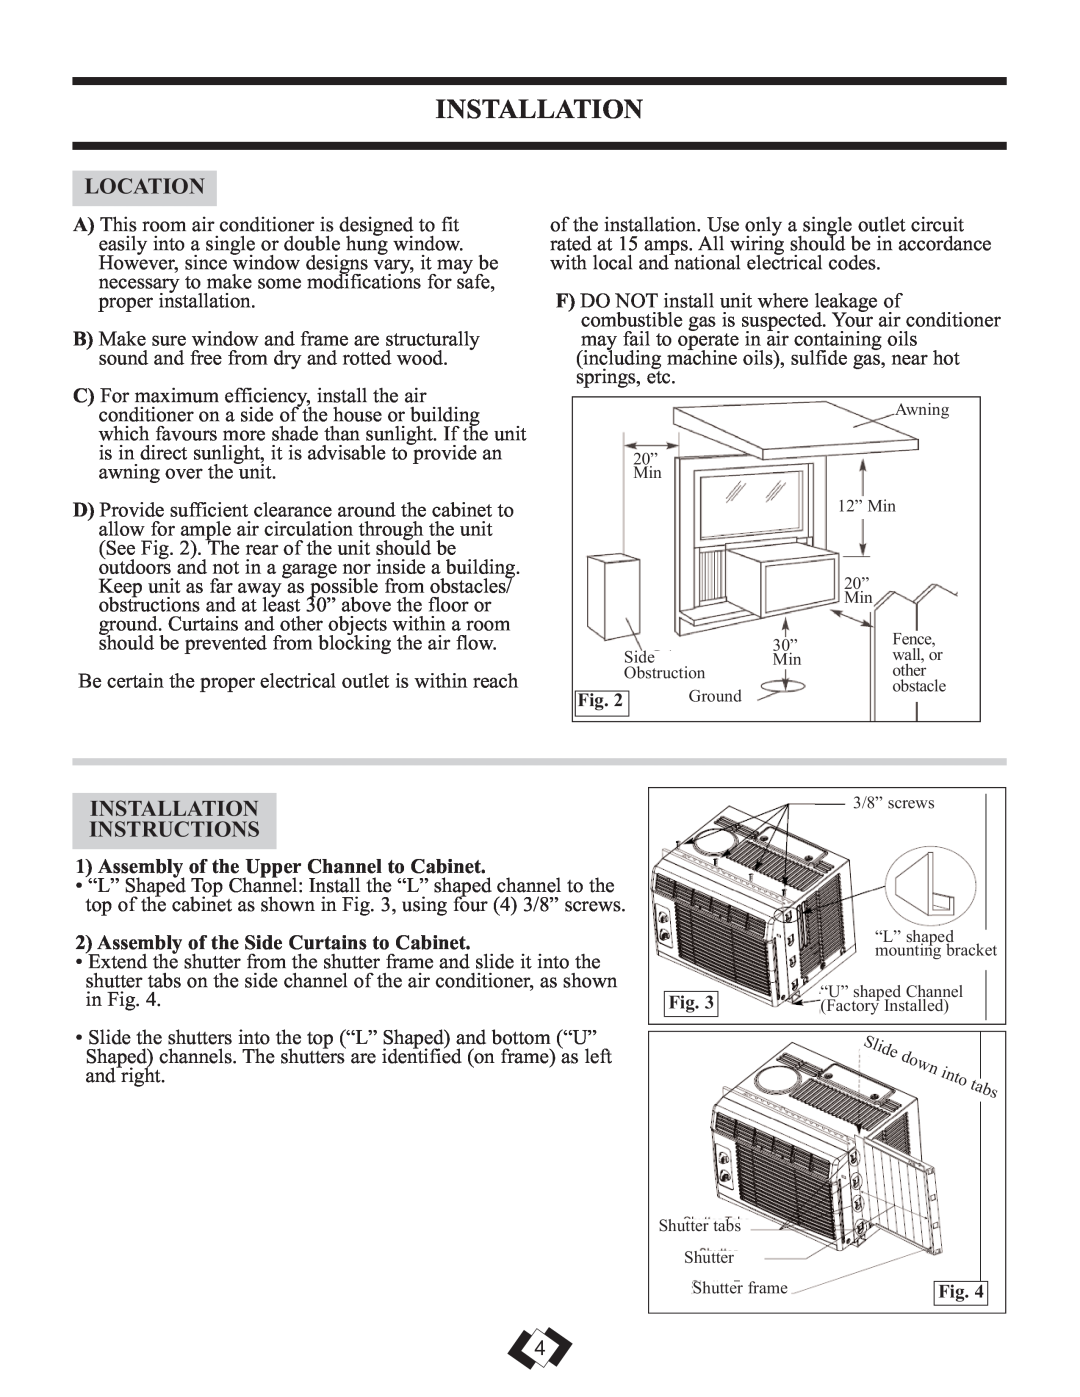 Danby DAC6010E warranty Location, Installation Instructions, Assembly of the Upper Channel to Cabinet 